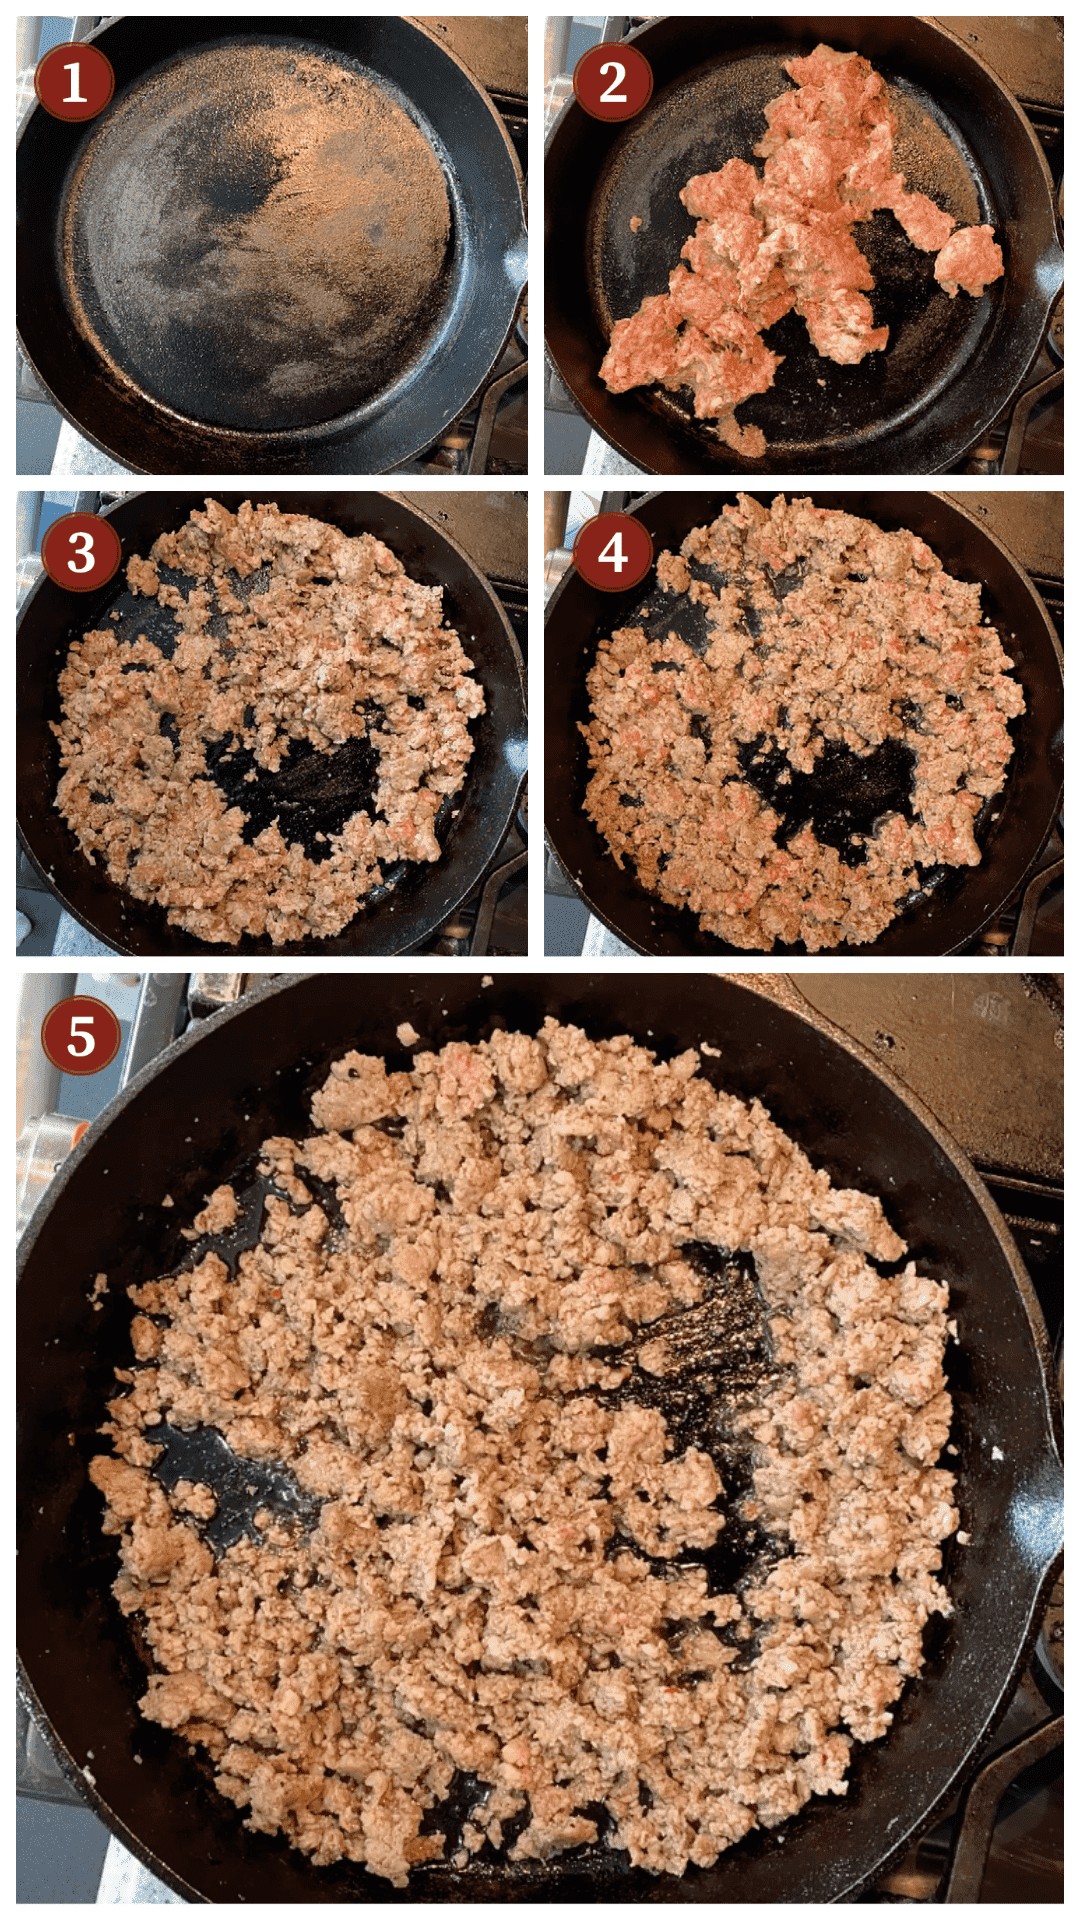 A collage of images showing how to make sausage gravy, steps 1 - 5.